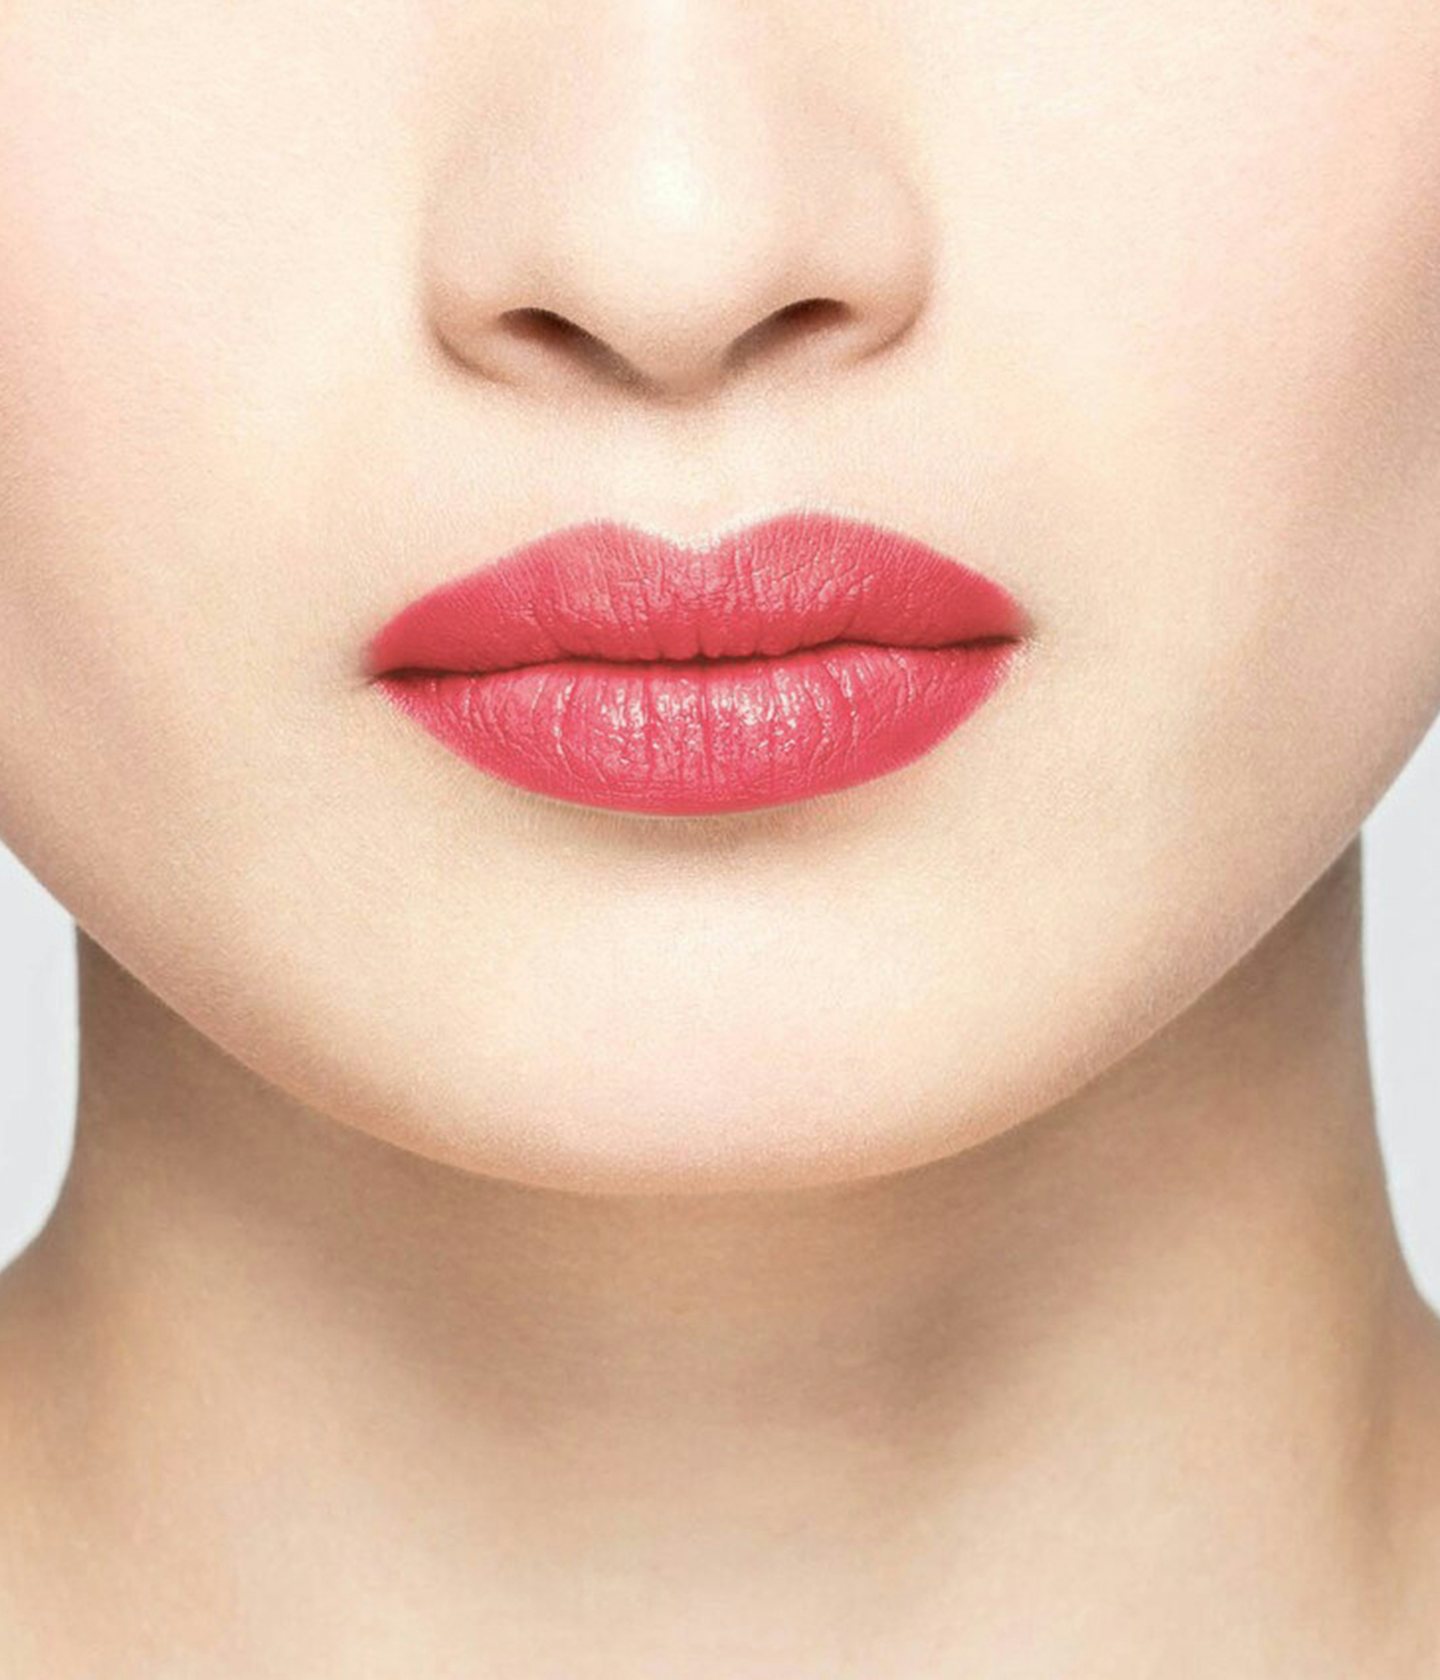 La bouche rouge Dewy Pink lipstick shade on the lips of an Asian model